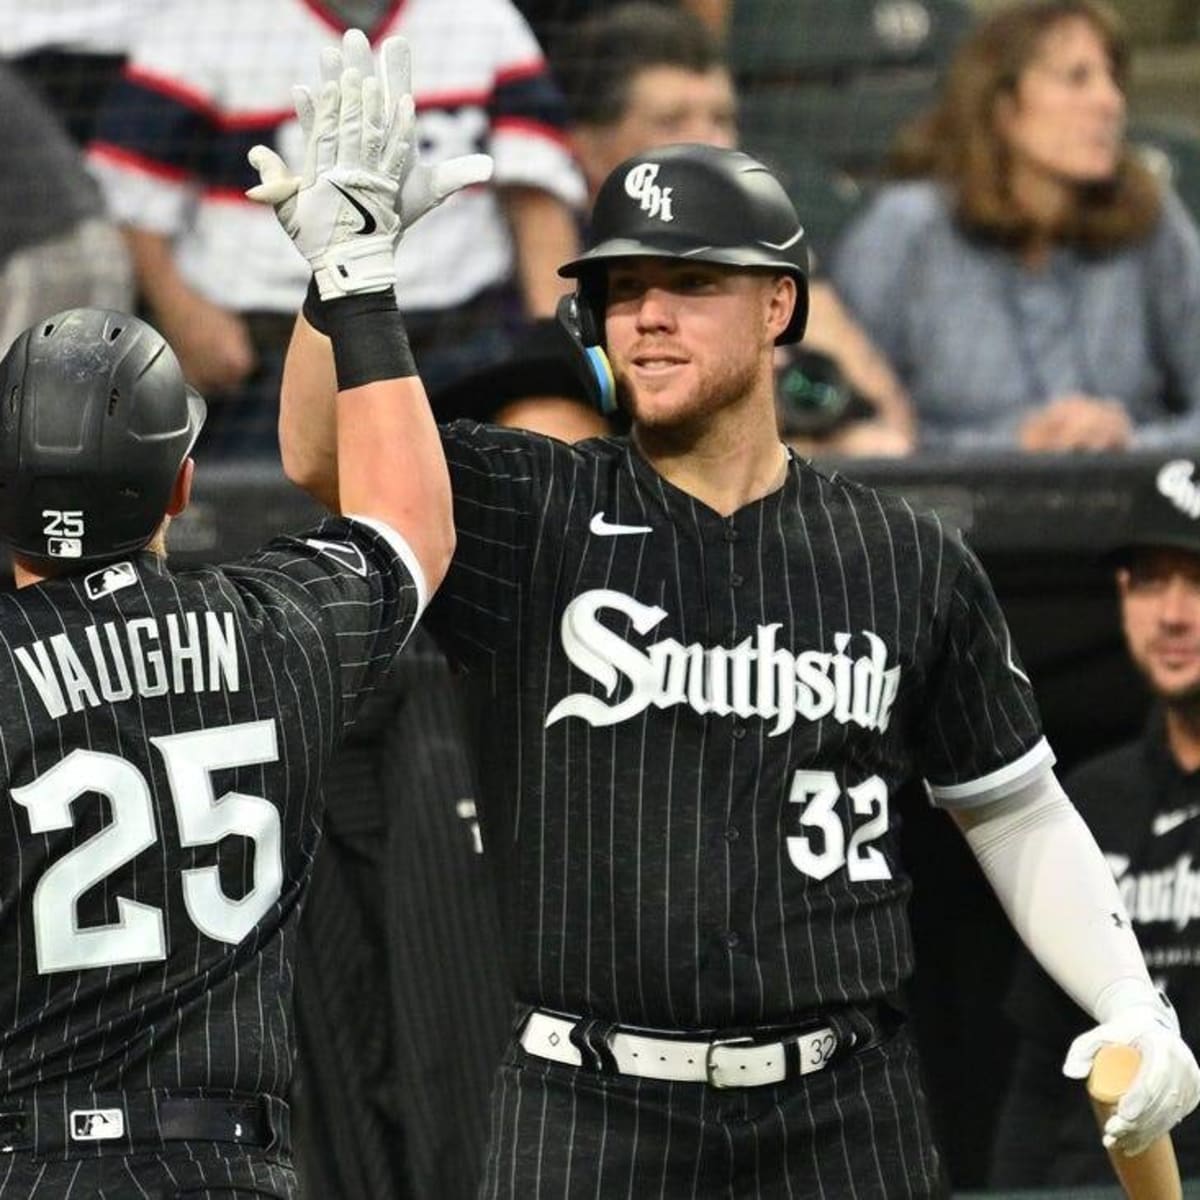 Andrew Vaughn gets 4 hits as White Sox beat Blue Jays 8-7